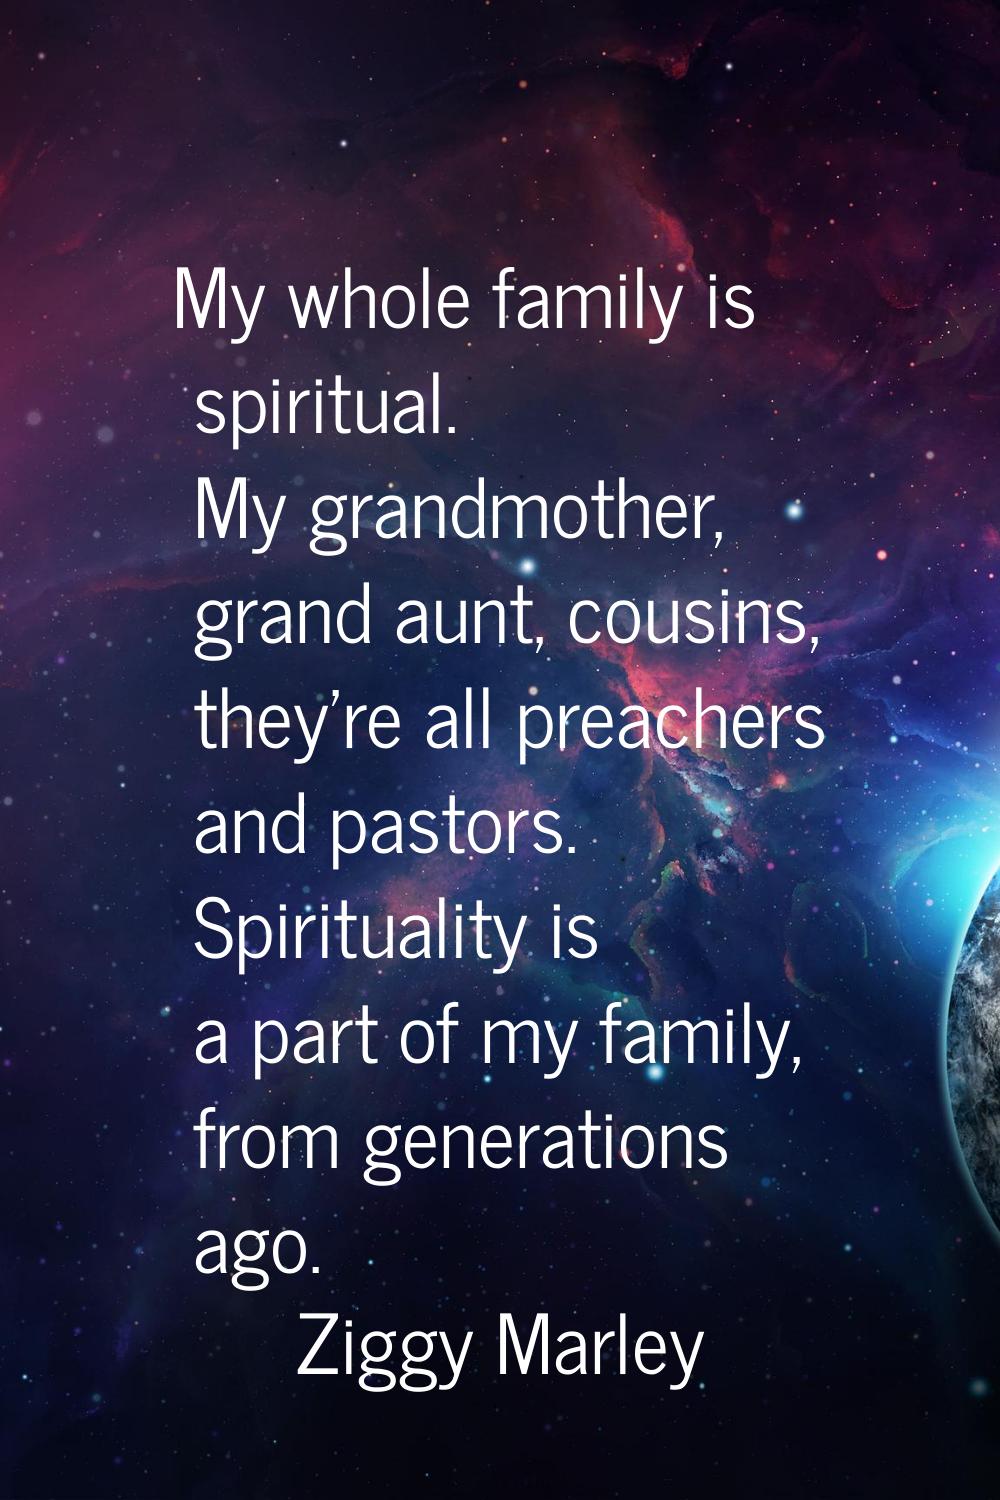 My whole family is spiritual. My grandmother, grand aunt, cousins, they're all preachers and pastor